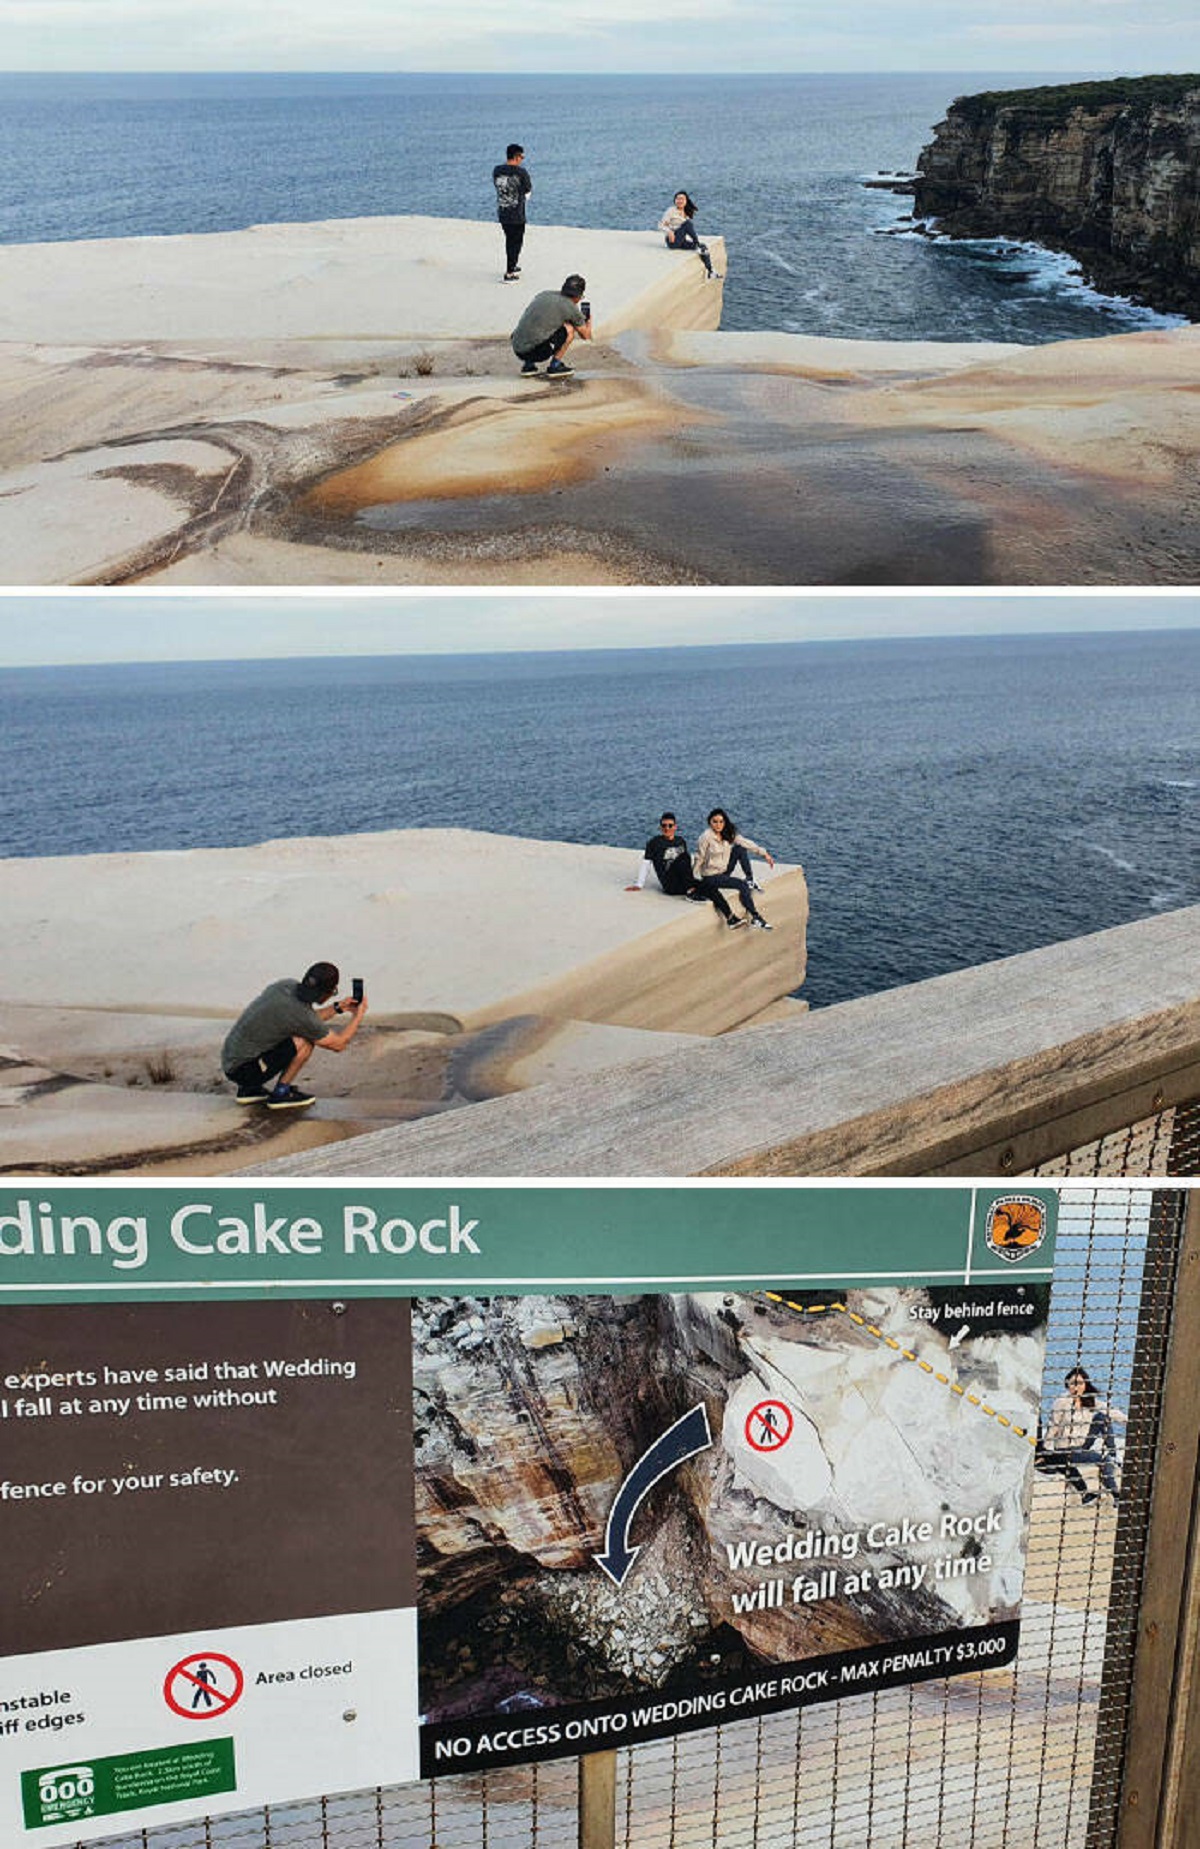 sea - ding Cake Rock experts have said that Wedding fall at any time without ence for your safety edges Wedding Cake Rock will fall at any me No Access Onto Wedding Care RockAnalys